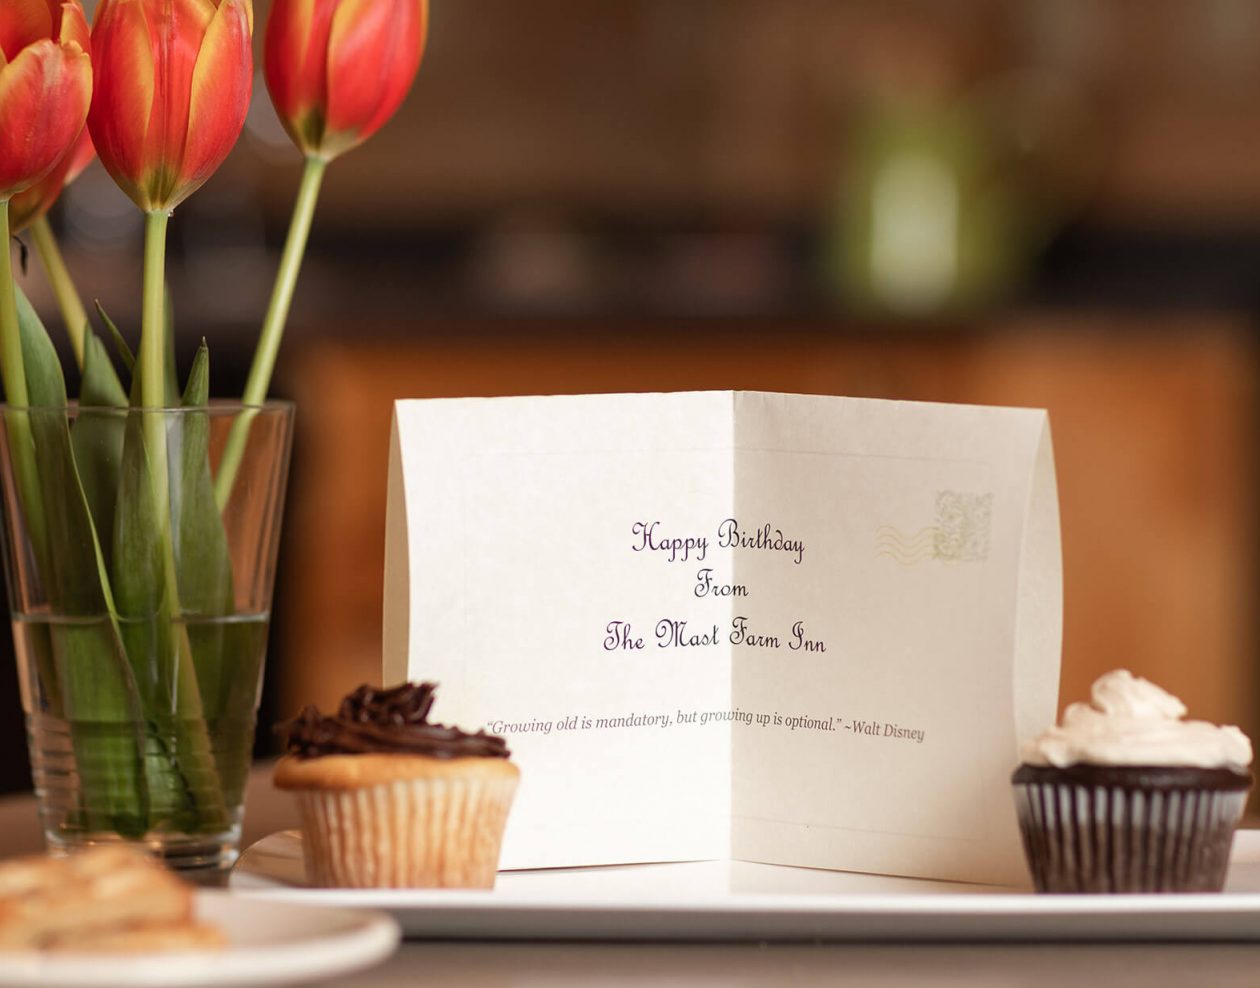 Birthday card, cupcakes and flowers